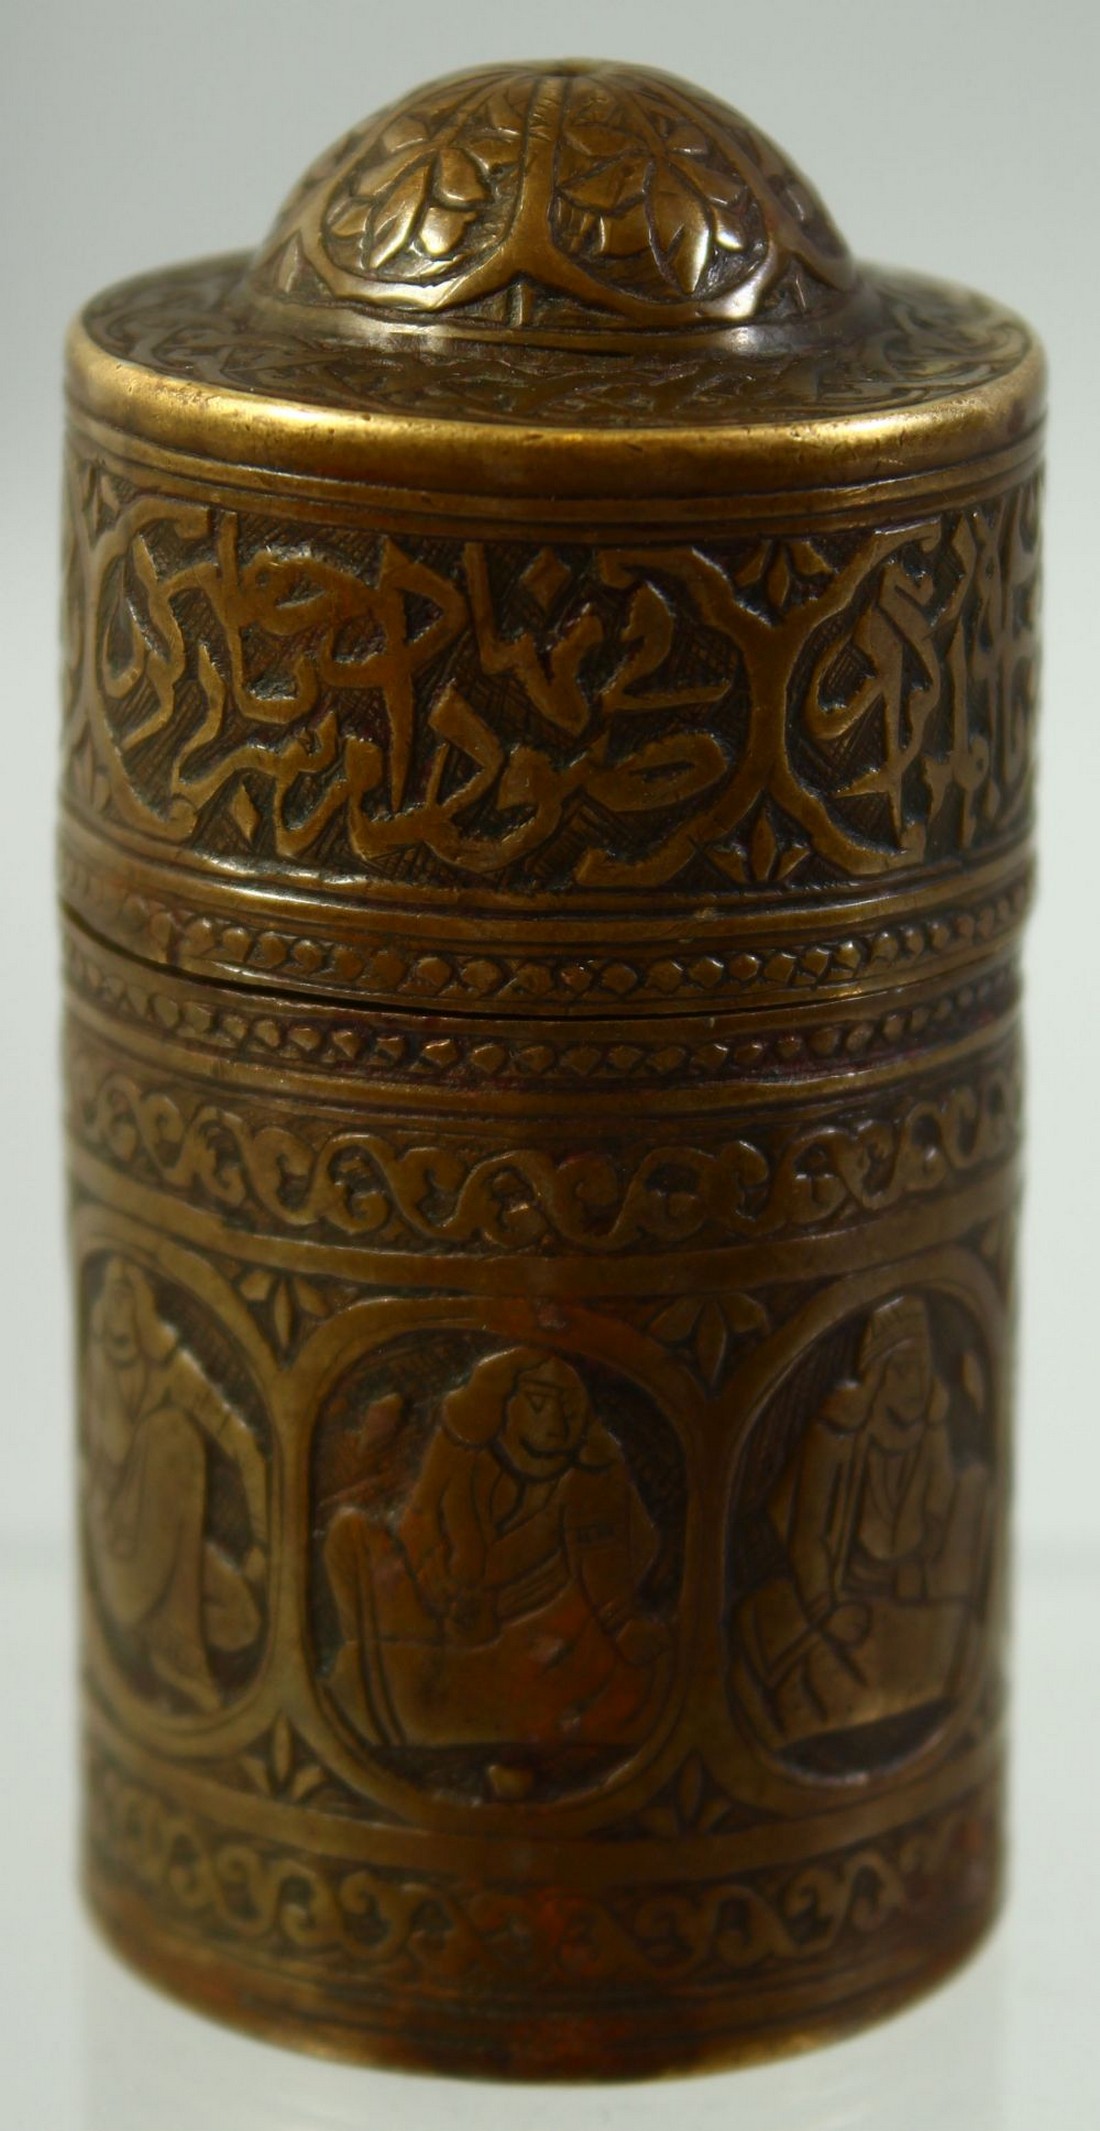 A SMALL FINE ISLAMIC BRASS CYLINDRICAL LIDDED VESSEL, engraved with panels of seated figures and